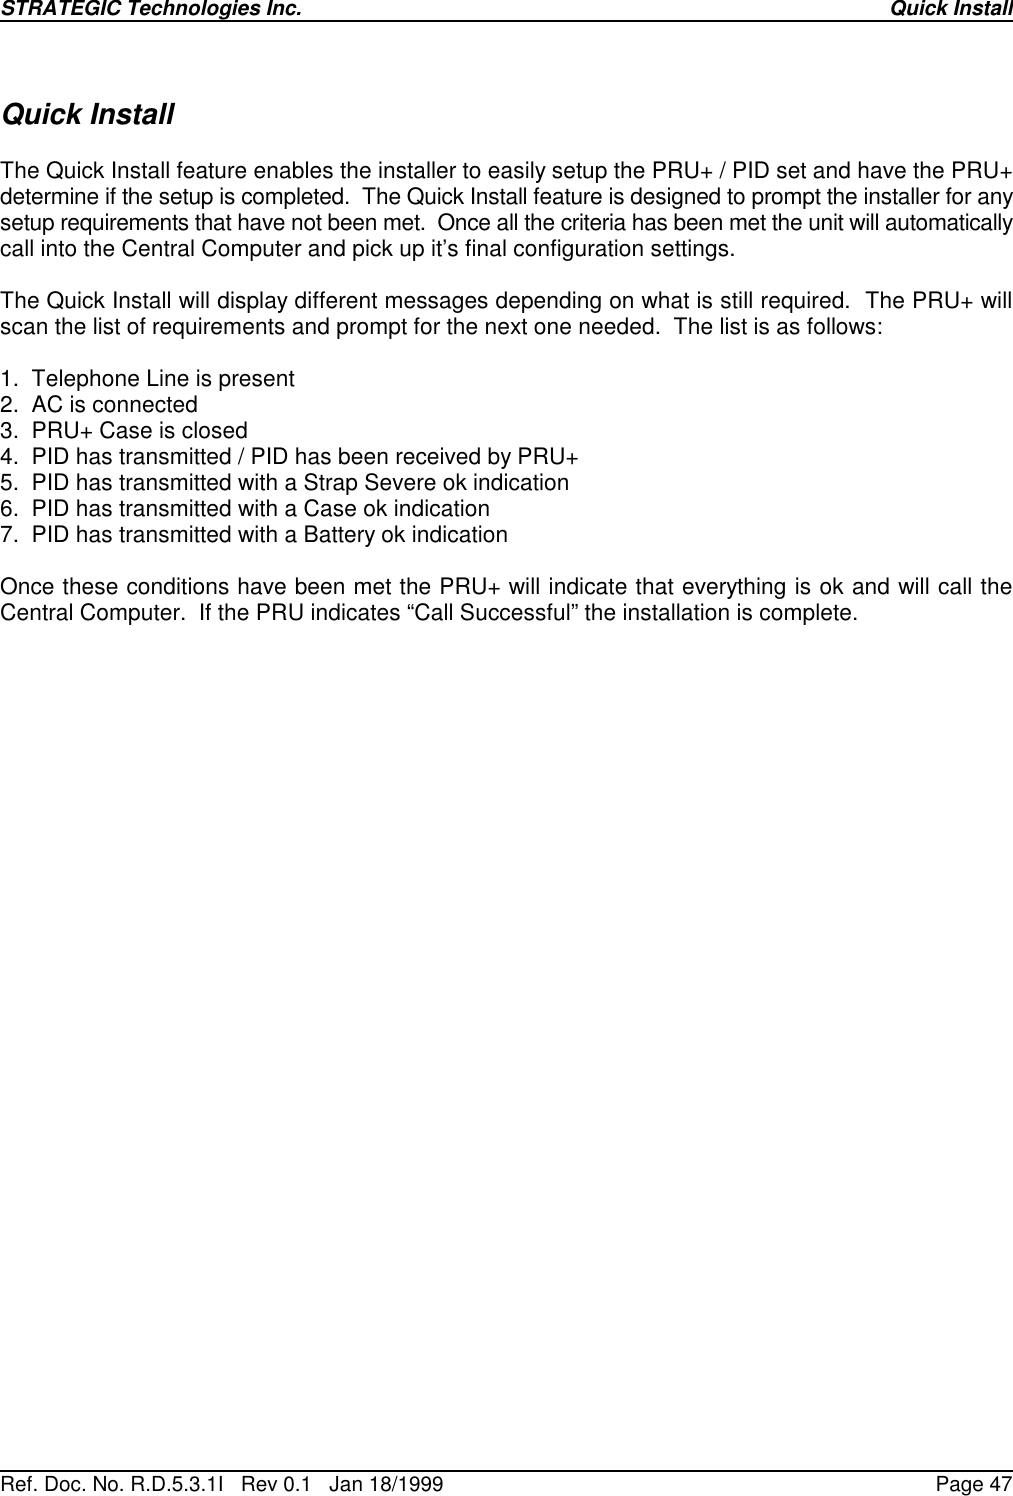 STRATEGIC Technologies Inc.Ref. Doc. No. R.D.5.3.1I   Rev 0.1   Jan 18/1999Quick InstallPage 47Quick InstallThe Quick Install feature enables the installer to easily setup the PRU+ / PID set and have the PRU+determine if the setup is completed.  The Quick Install feature is designed to prompt the installer for anysetup requirements that have not been met.  Once all the criteria has been met the unit will automaticallycall into the Central Computer and pick up it’s final configuration settings.The Quick Install will display different messages depending on what is still required.  The PRU+ willscan the list of requirements and prompt for the next one needed.  The list is as follows:1.  Telephone Line is present2.  AC is connected3.  PRU+ Case is closed4.  PID has transmitted / PID has been received by PRU+5.  PID has transmitted with a Strap Severe ok indication6.  PID has transmitted with a Case ok indication7.  PID has transmitted with a Battery ok indicationOnce these conditions have been met the PRU+ will indicate that everything is ok and will call theCentral Computer.  If the PRU indicates “Call Successful” the installation is complete.